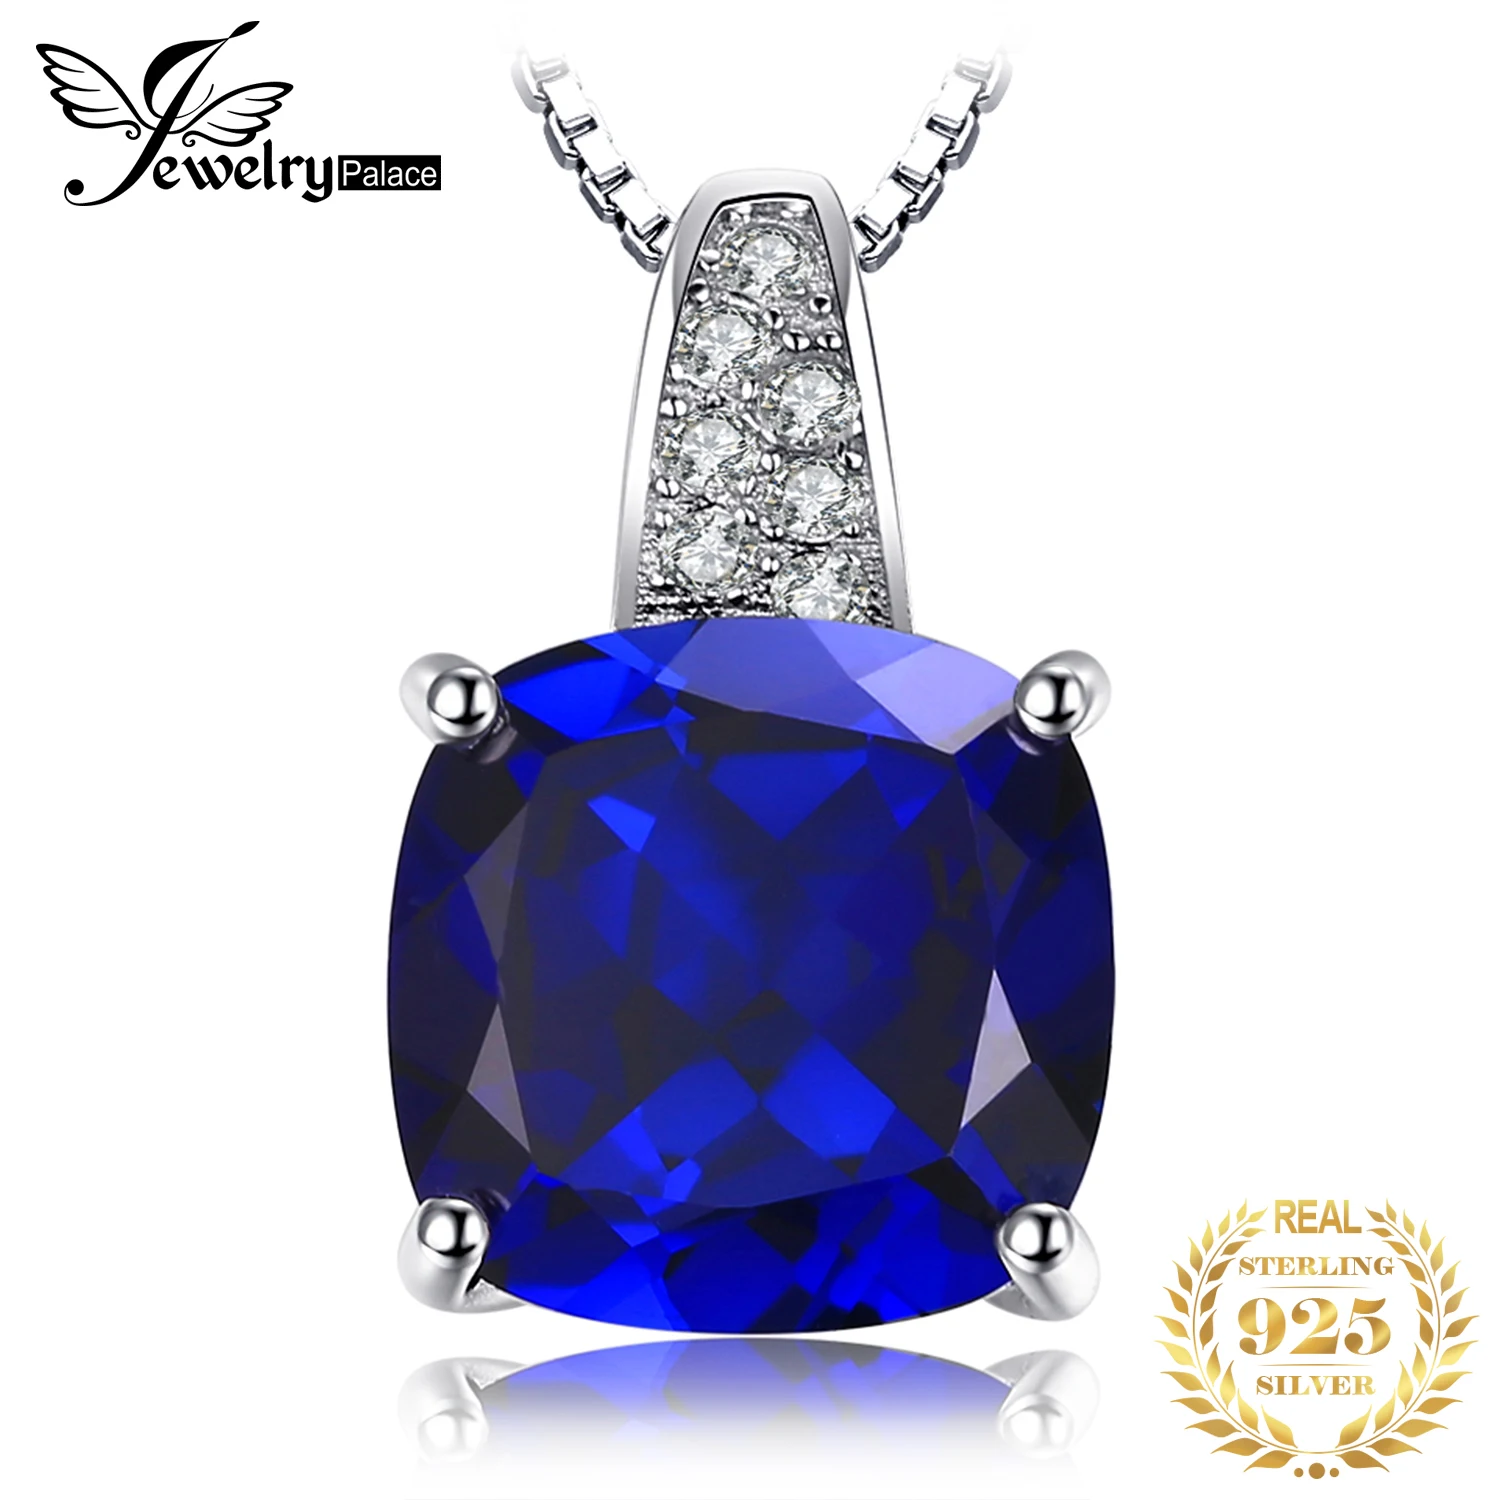 

JewelryPalace Cushion 4.7ct Created Blue Sapphire 925 Sterling Silver Pendant Necklace for Women Gemstone Choker No Chain